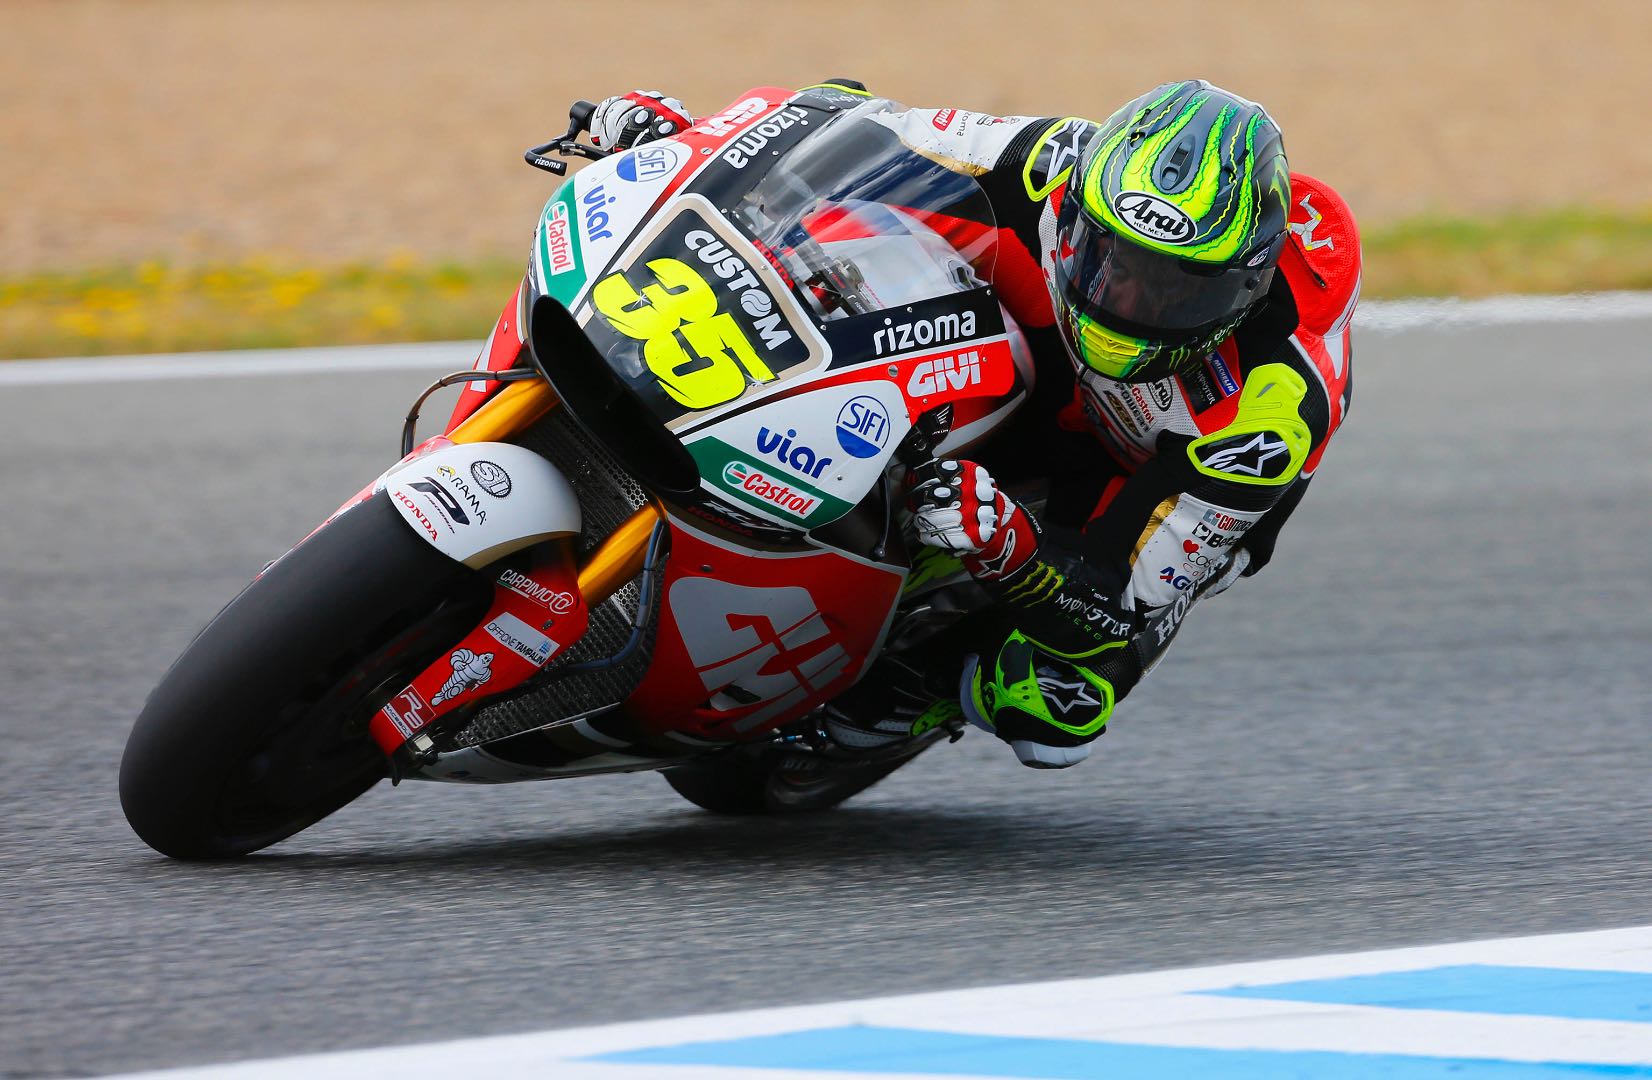 Cal Crutchlow undergoes surgery, fitness test on Thursday